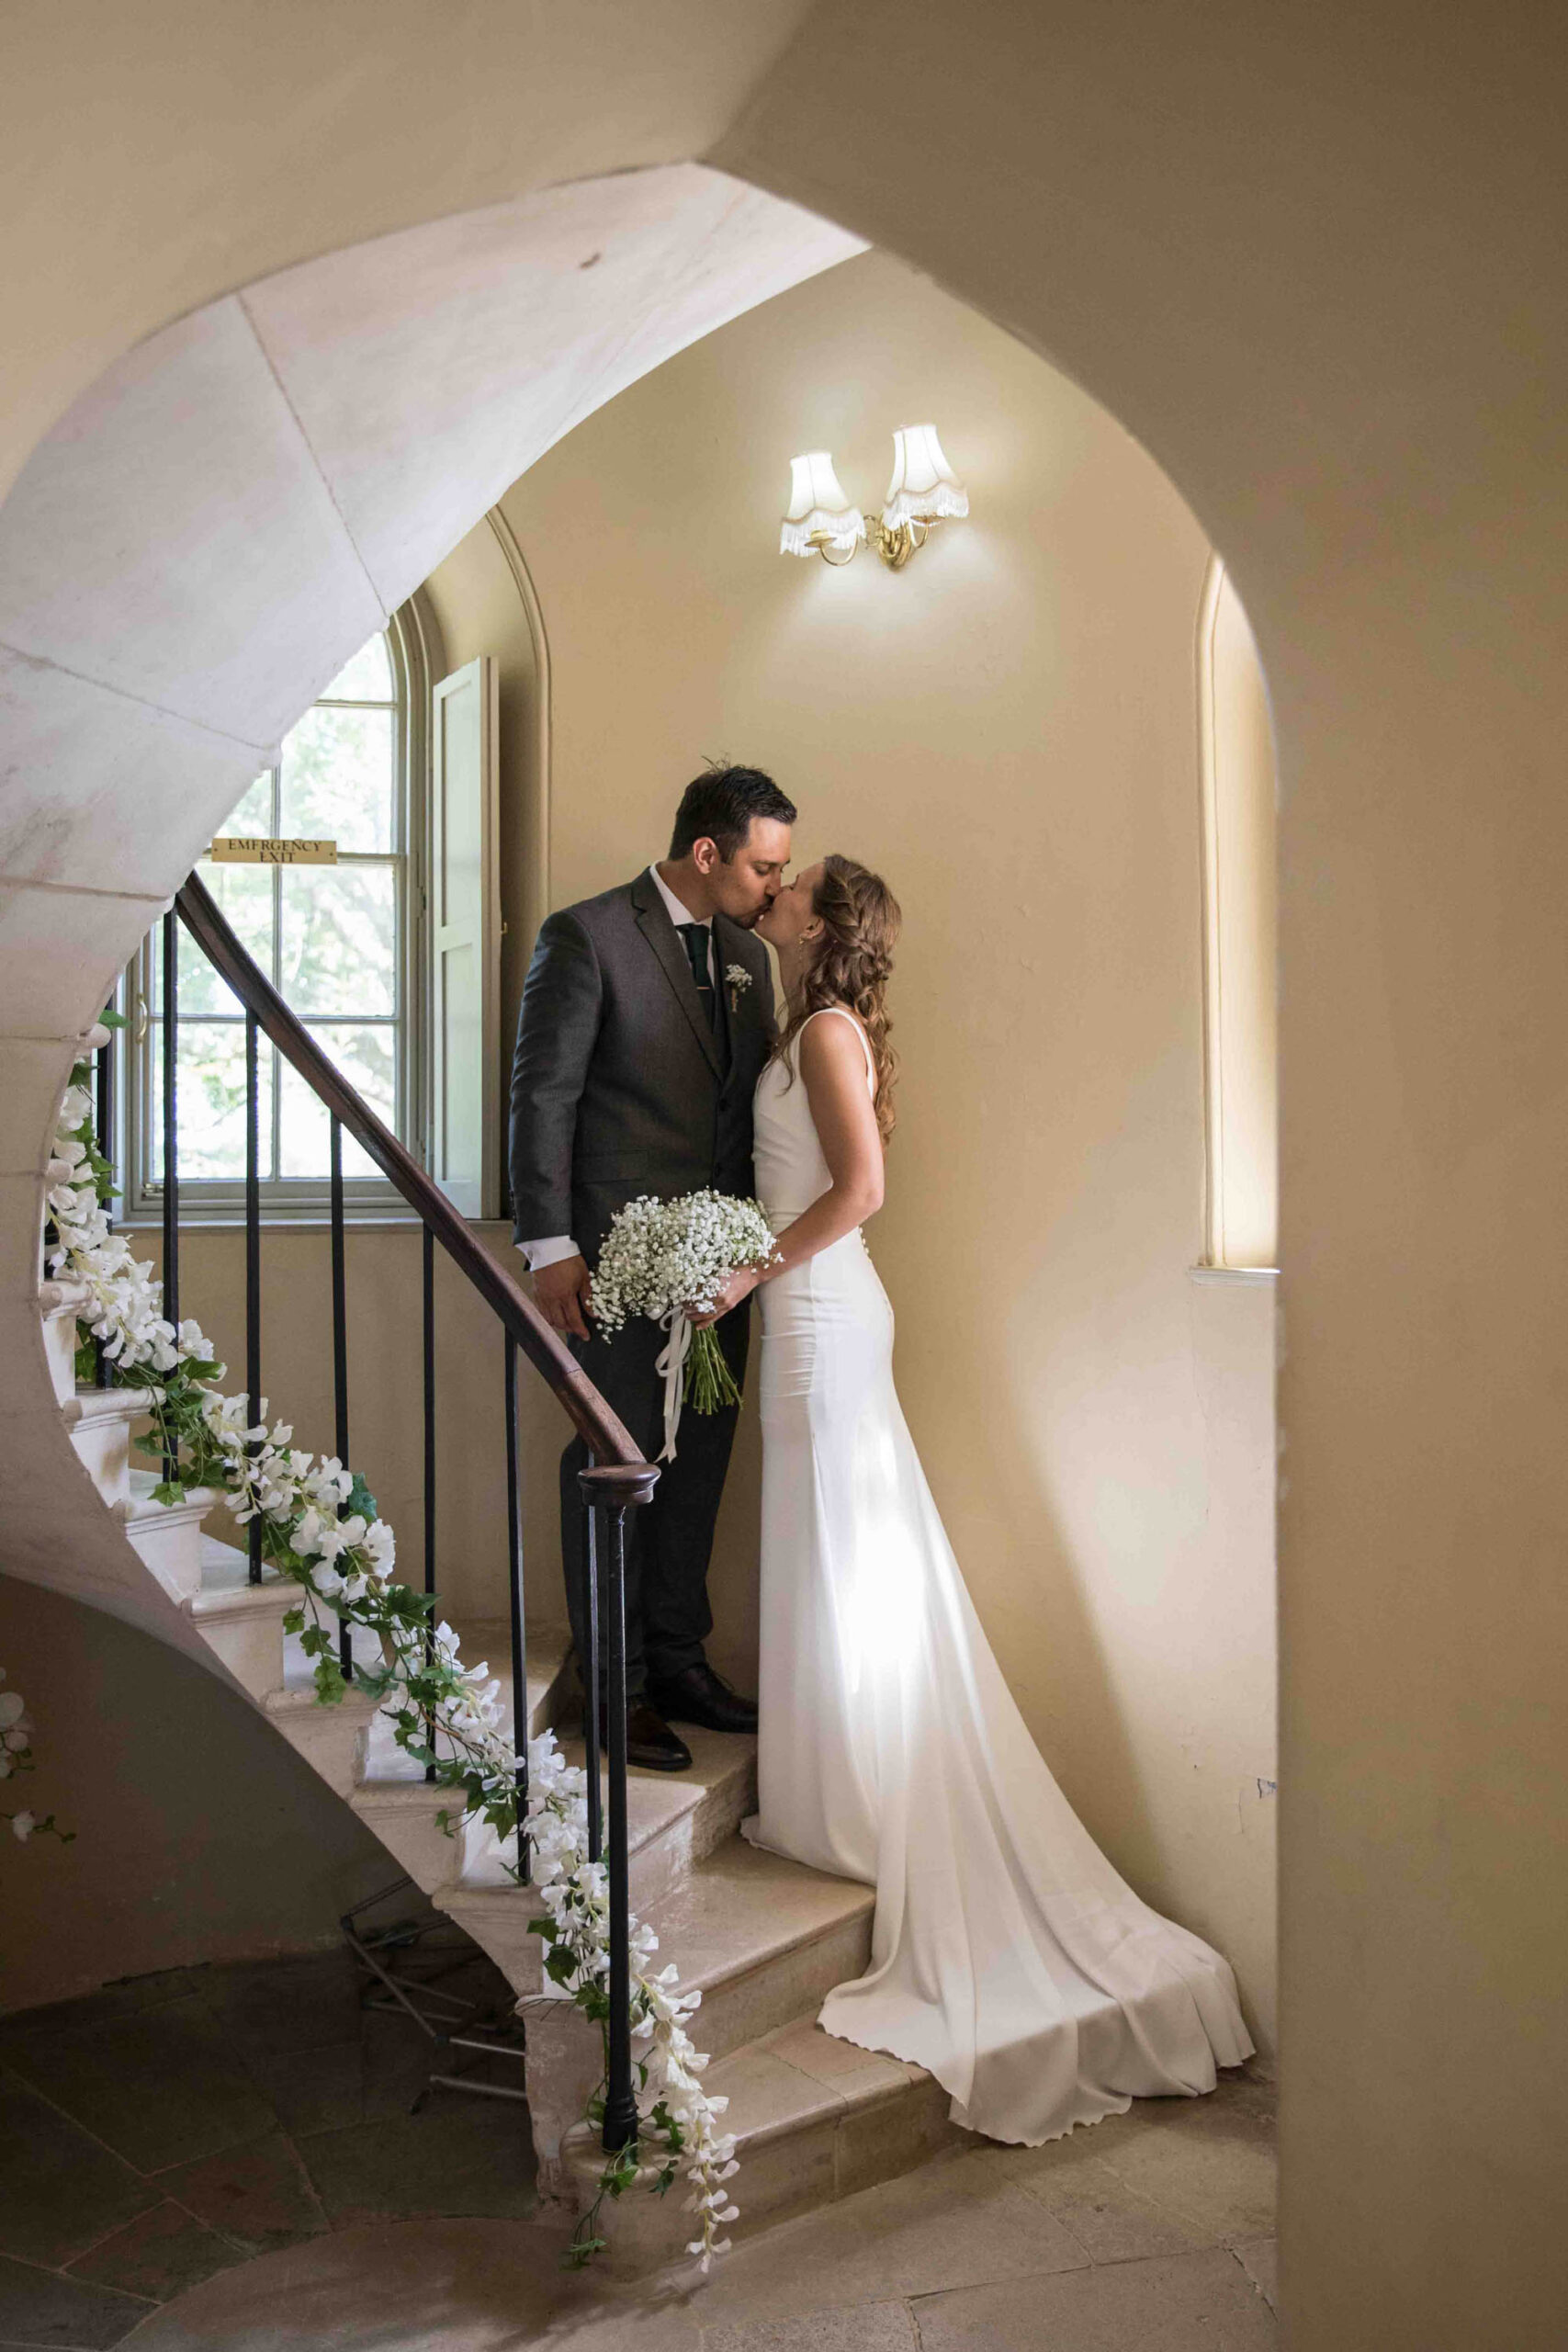 Elegant wedding portrait taken from an archway in a stately home. There are flowers lining the staircase where a bride and groom are sharing a kiss. Snapdragon Photography is based in Devon